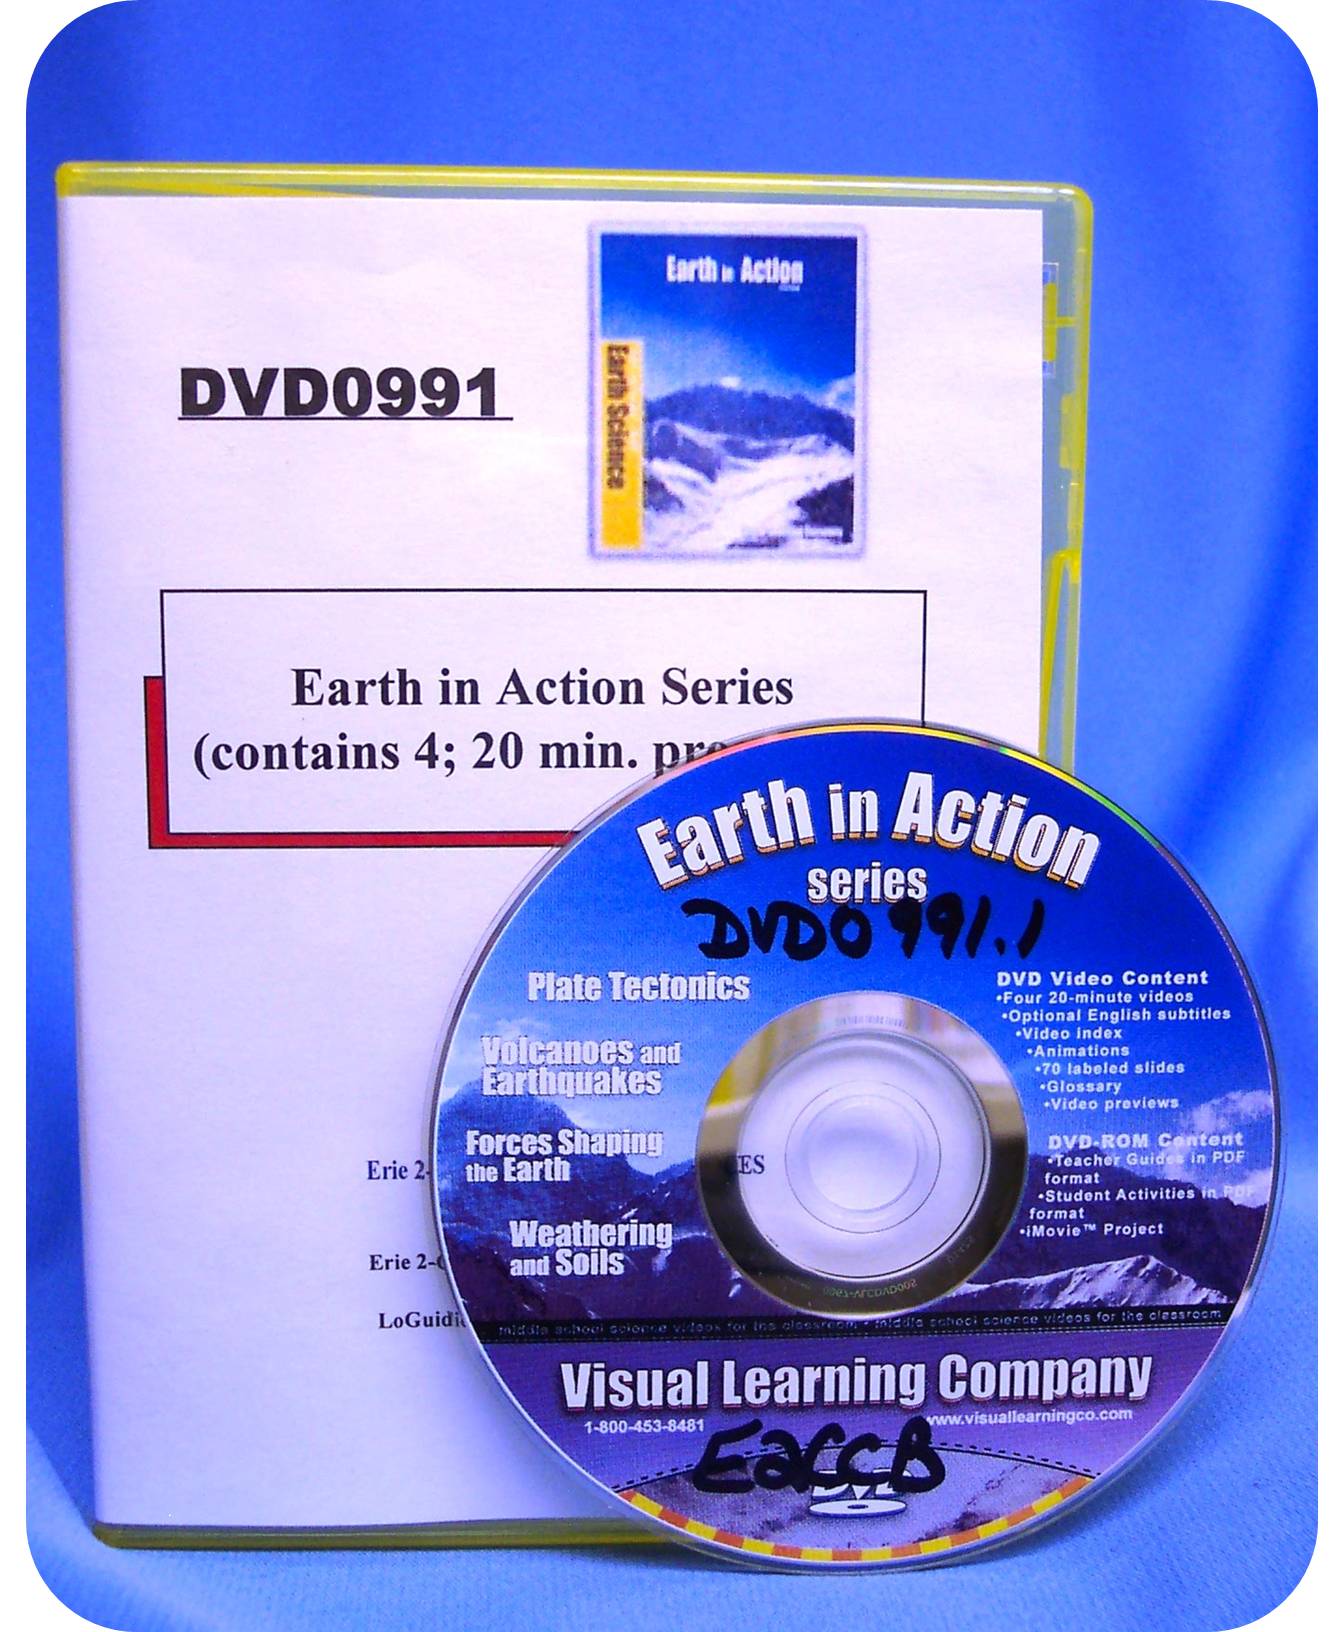 Earth in Action Series (contains 4; 20 min. programs)